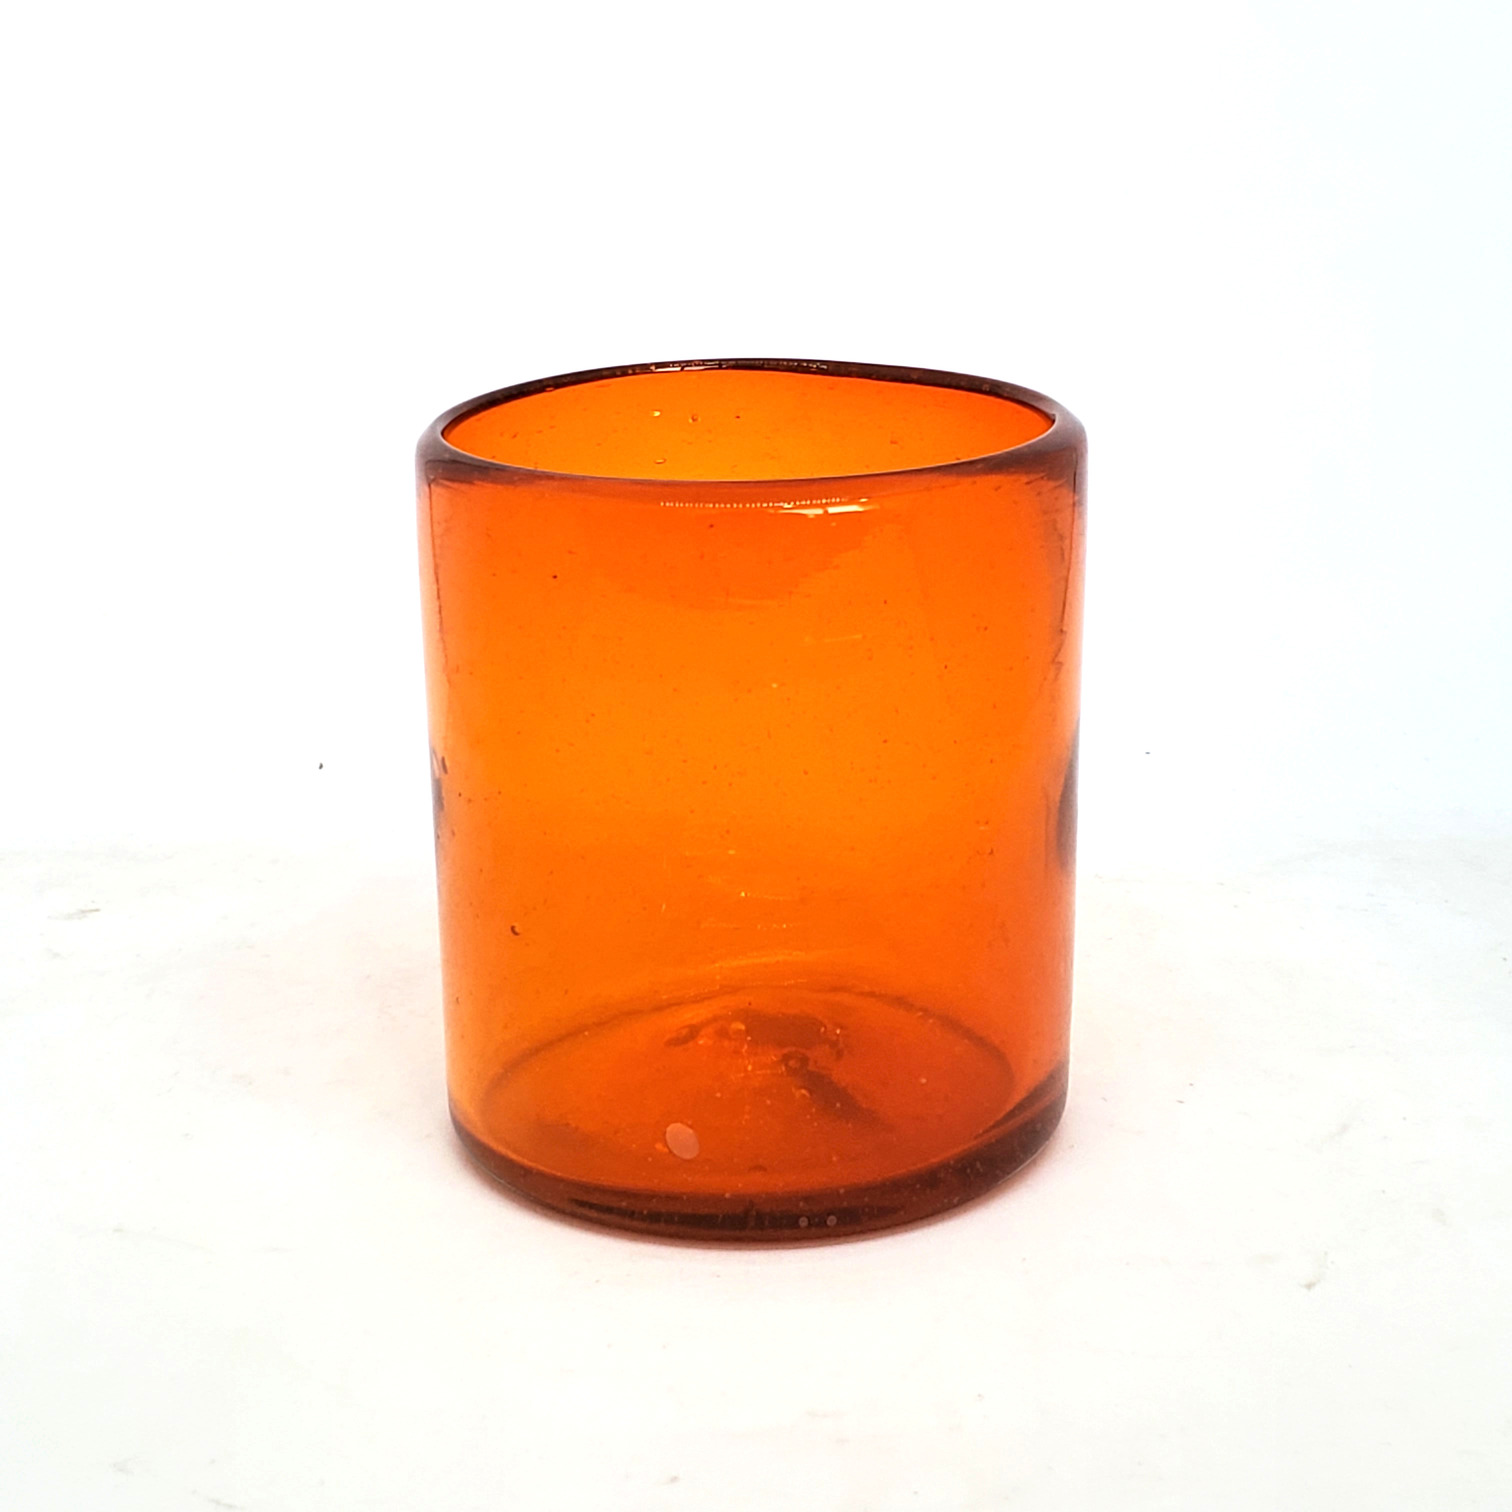 Mexican Glasses / Solid Orange 9 oz Short Tumblers (set of 6) / Enhance your favorite drink with these colorful handcrafted glasses.